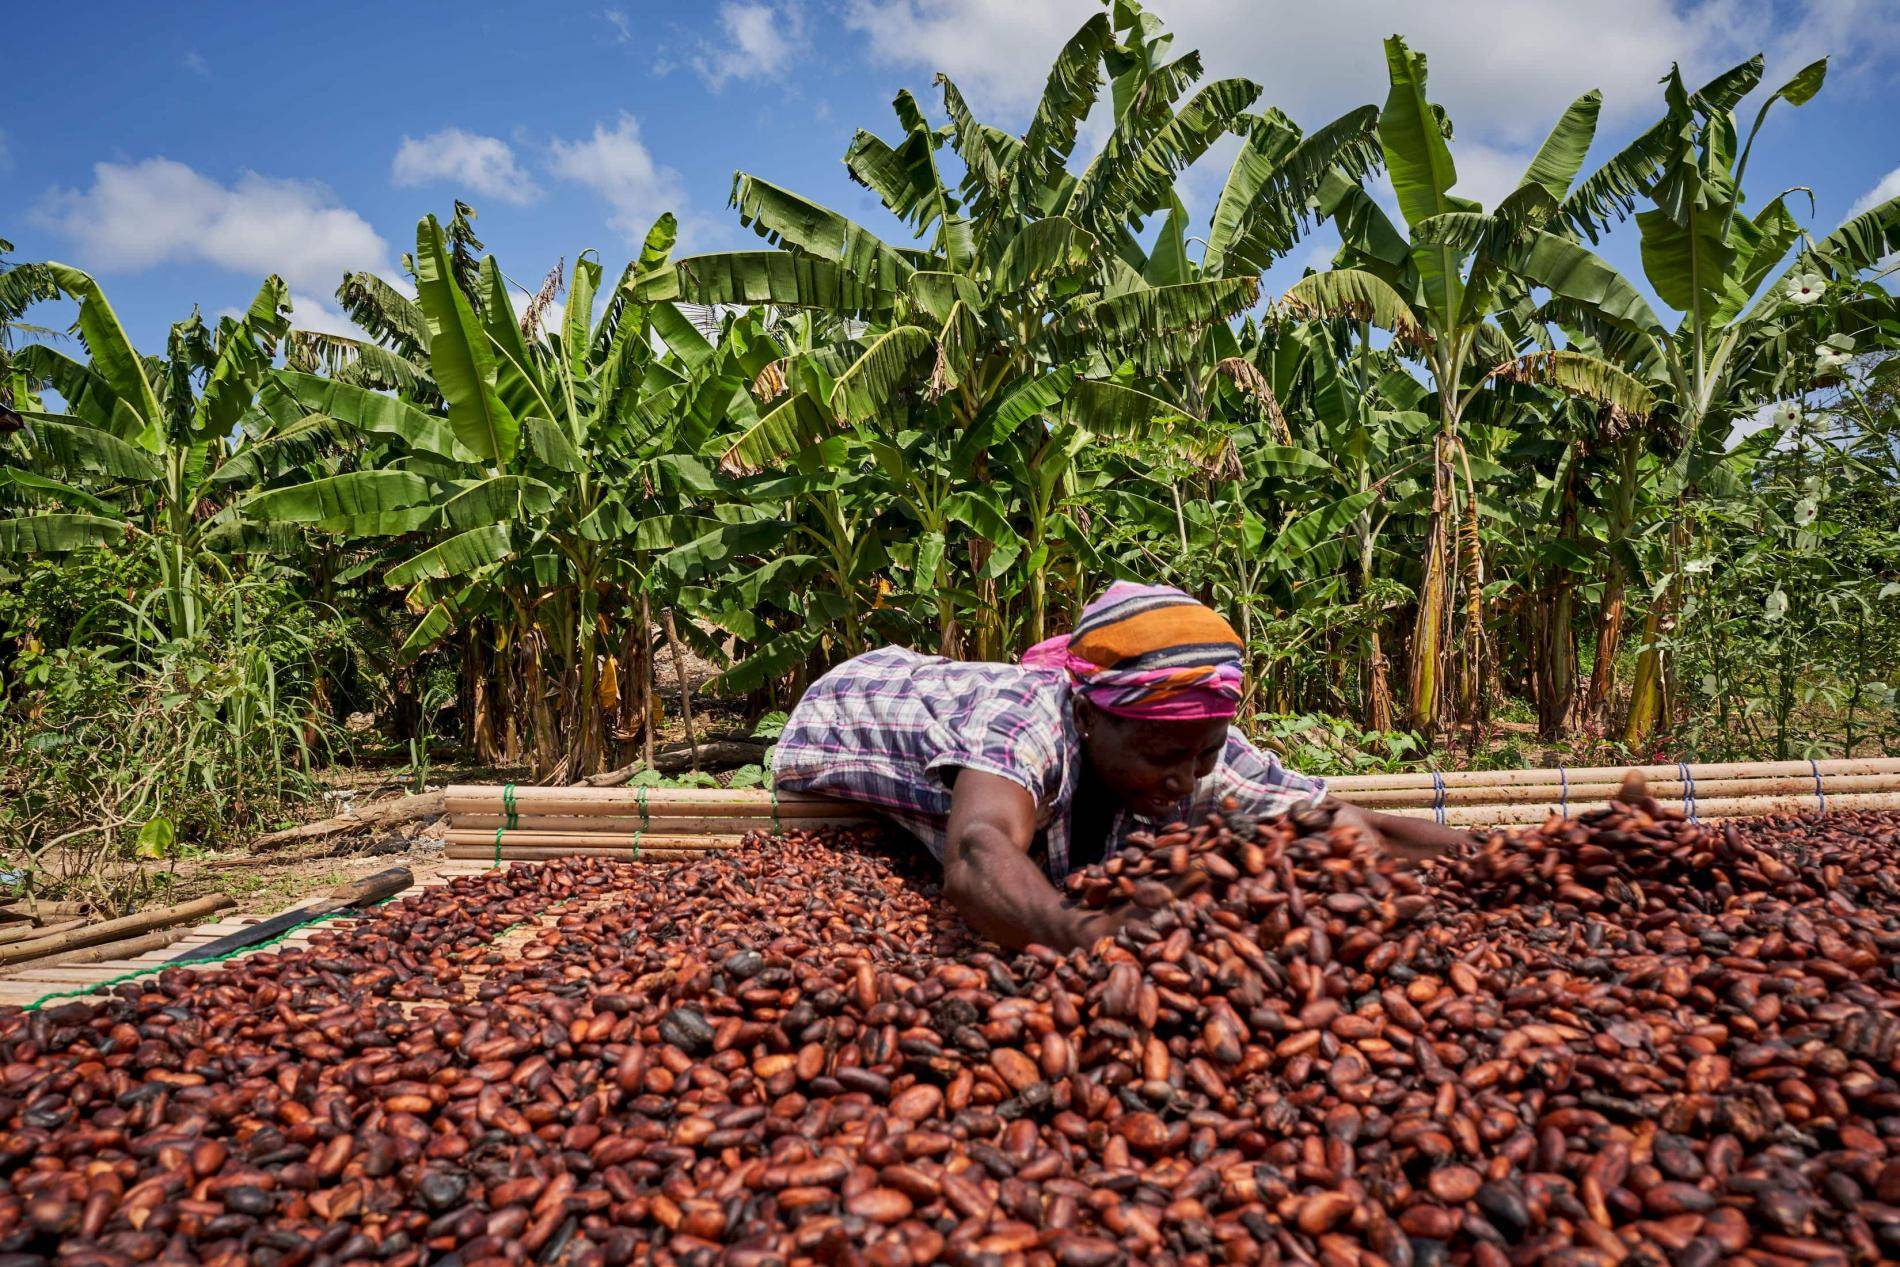 Low farmgate prices put strain on West African cocoa